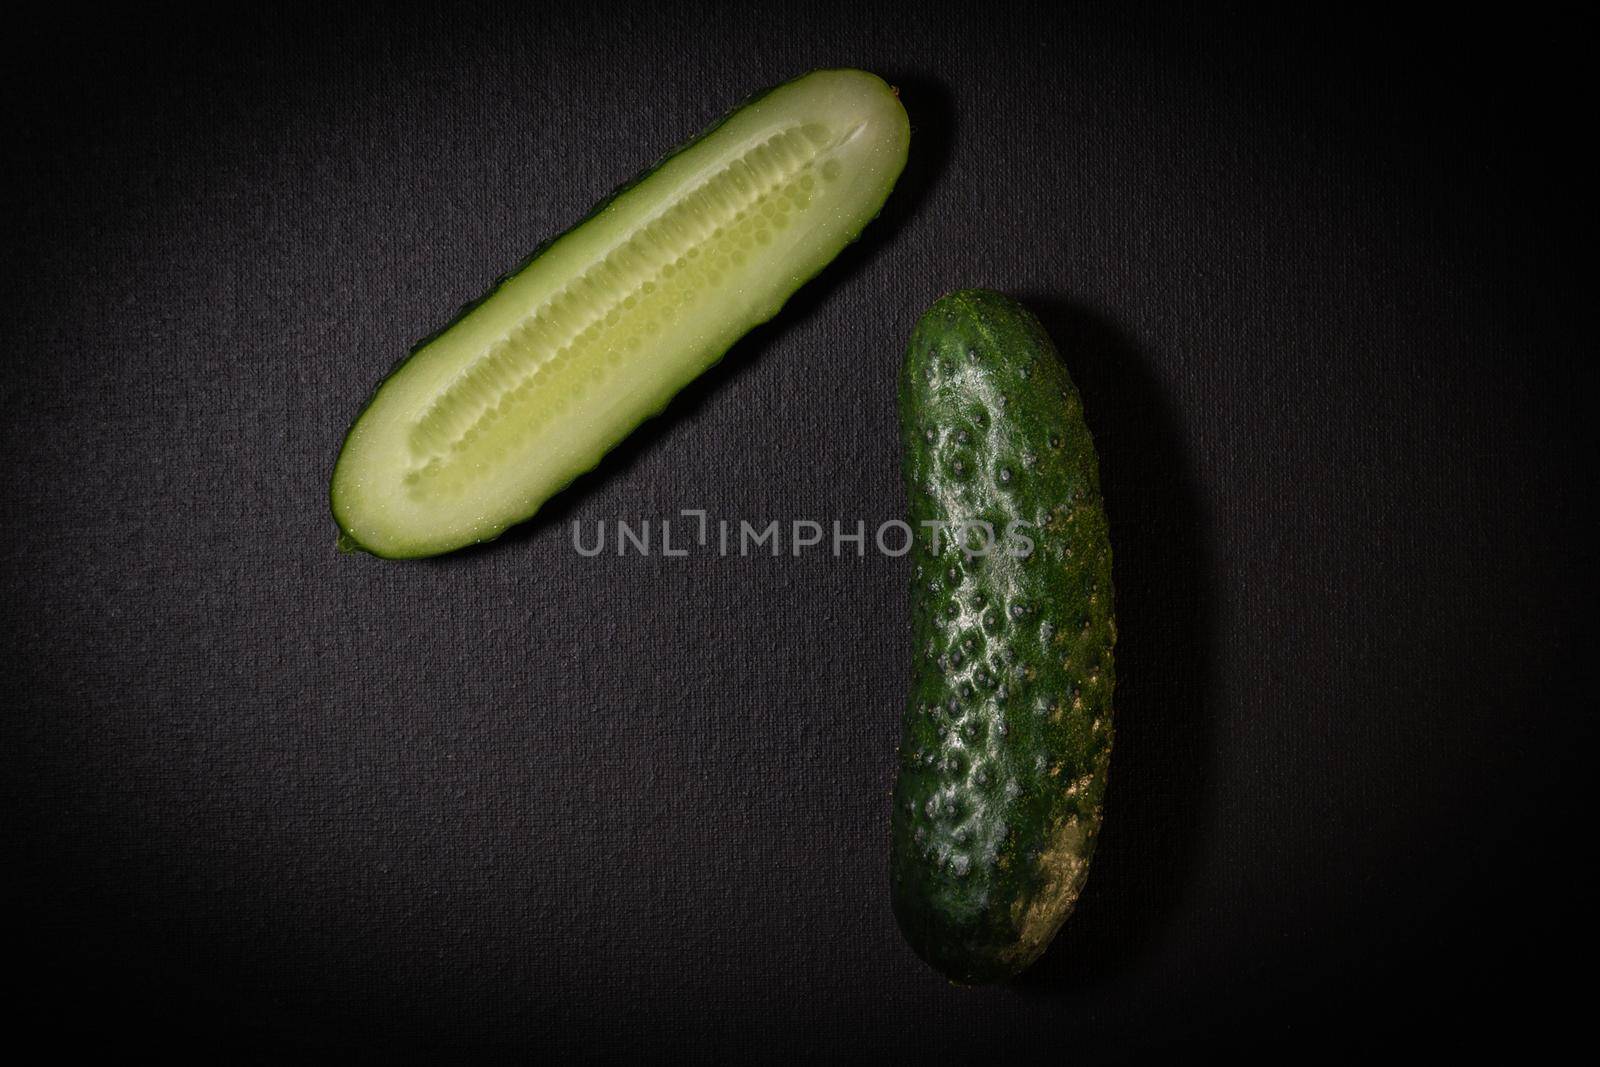 Two green cucumbers on a dark background. Whole cucumber and cut in half